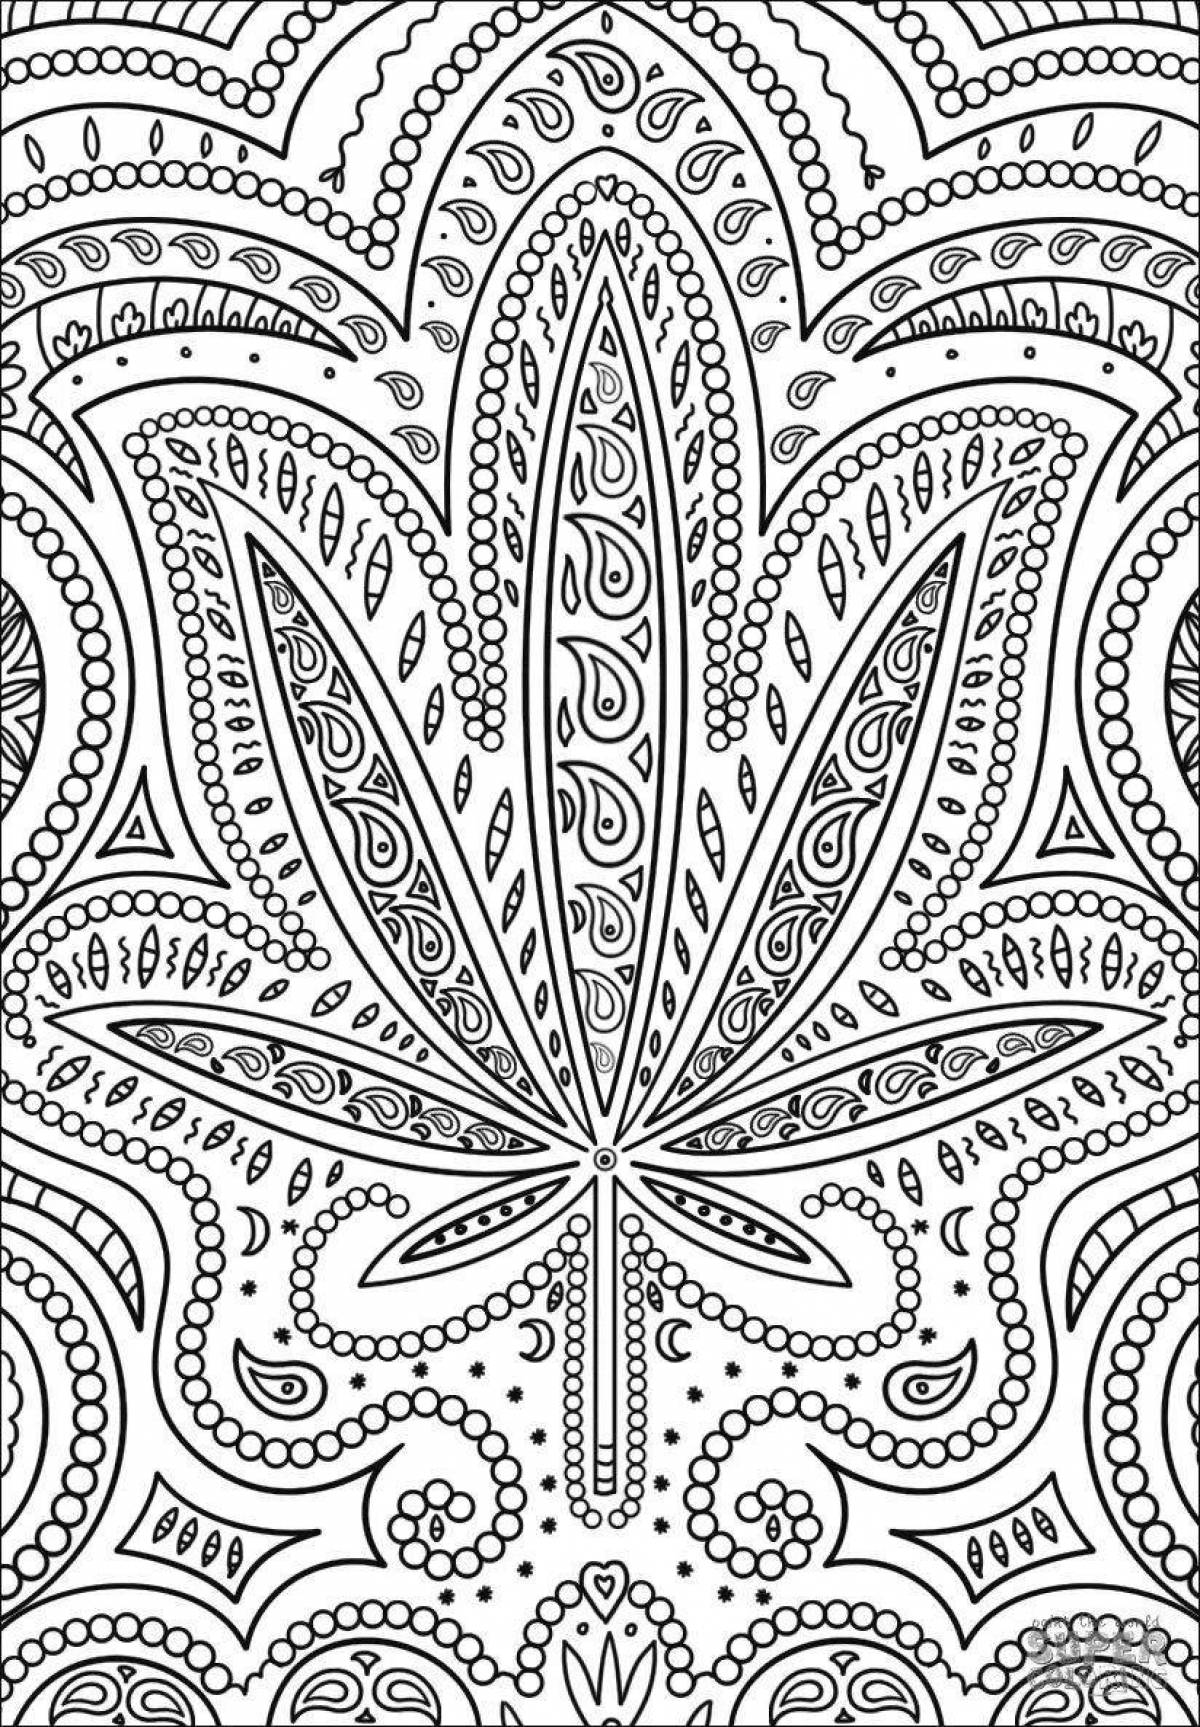 A lovely hippie coloring book